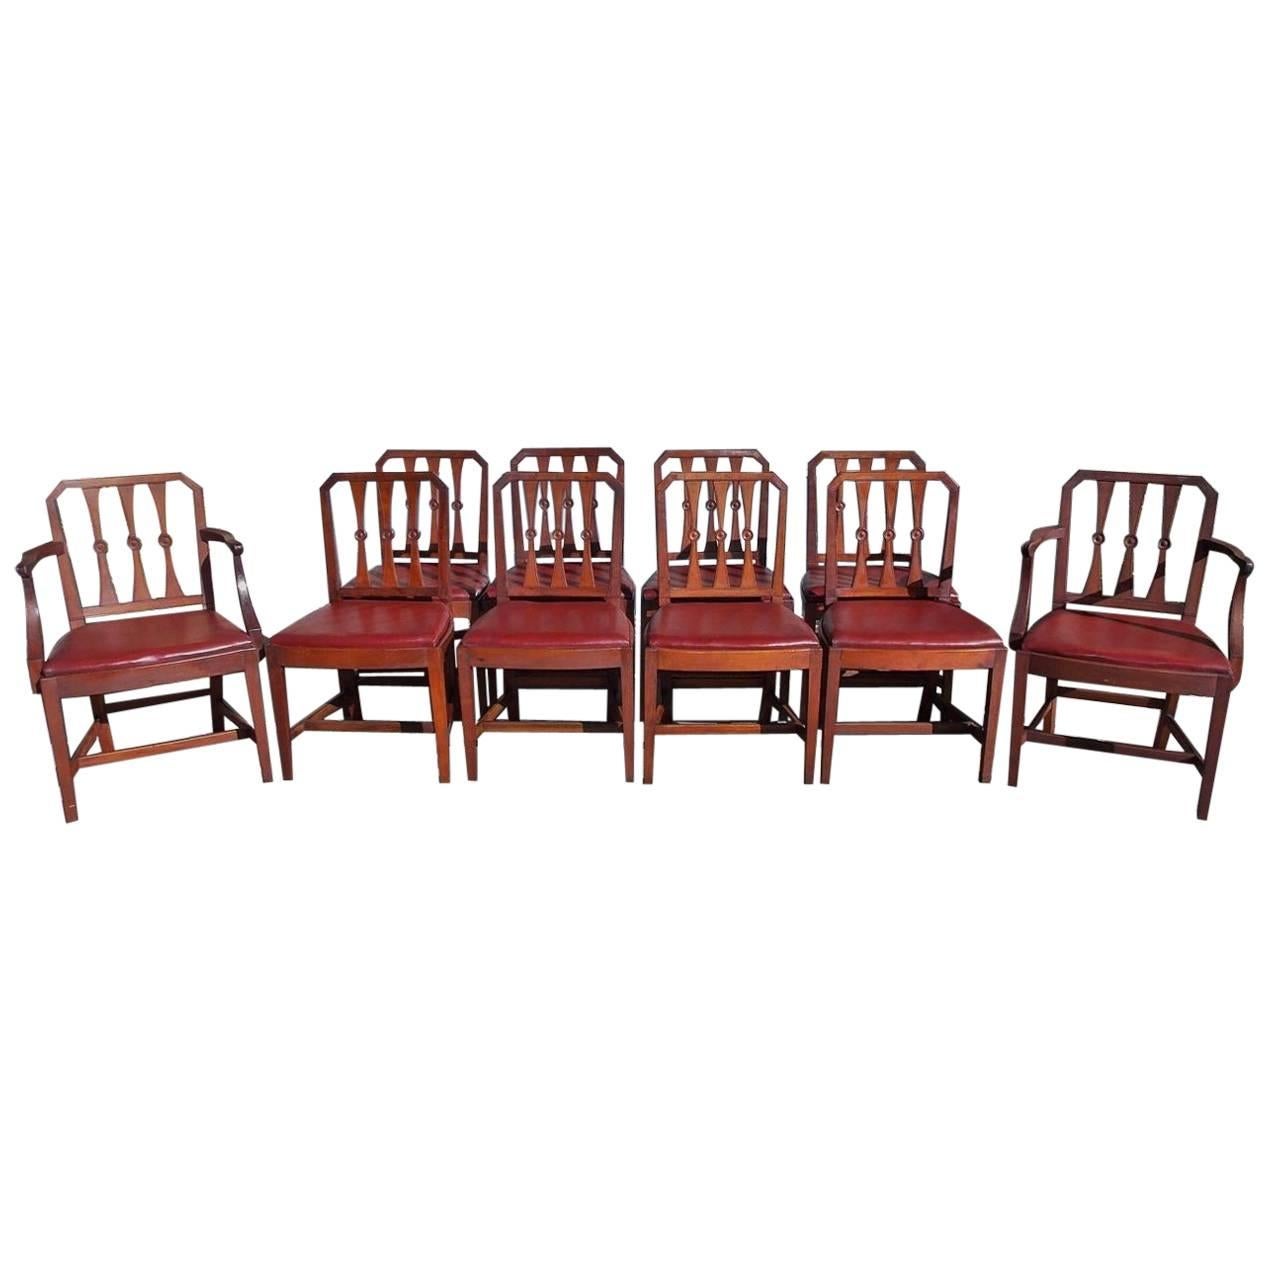 Set of Ten English Regency Mahogany Dining Chairs With Leather Seats, Circa 1800 For Sale